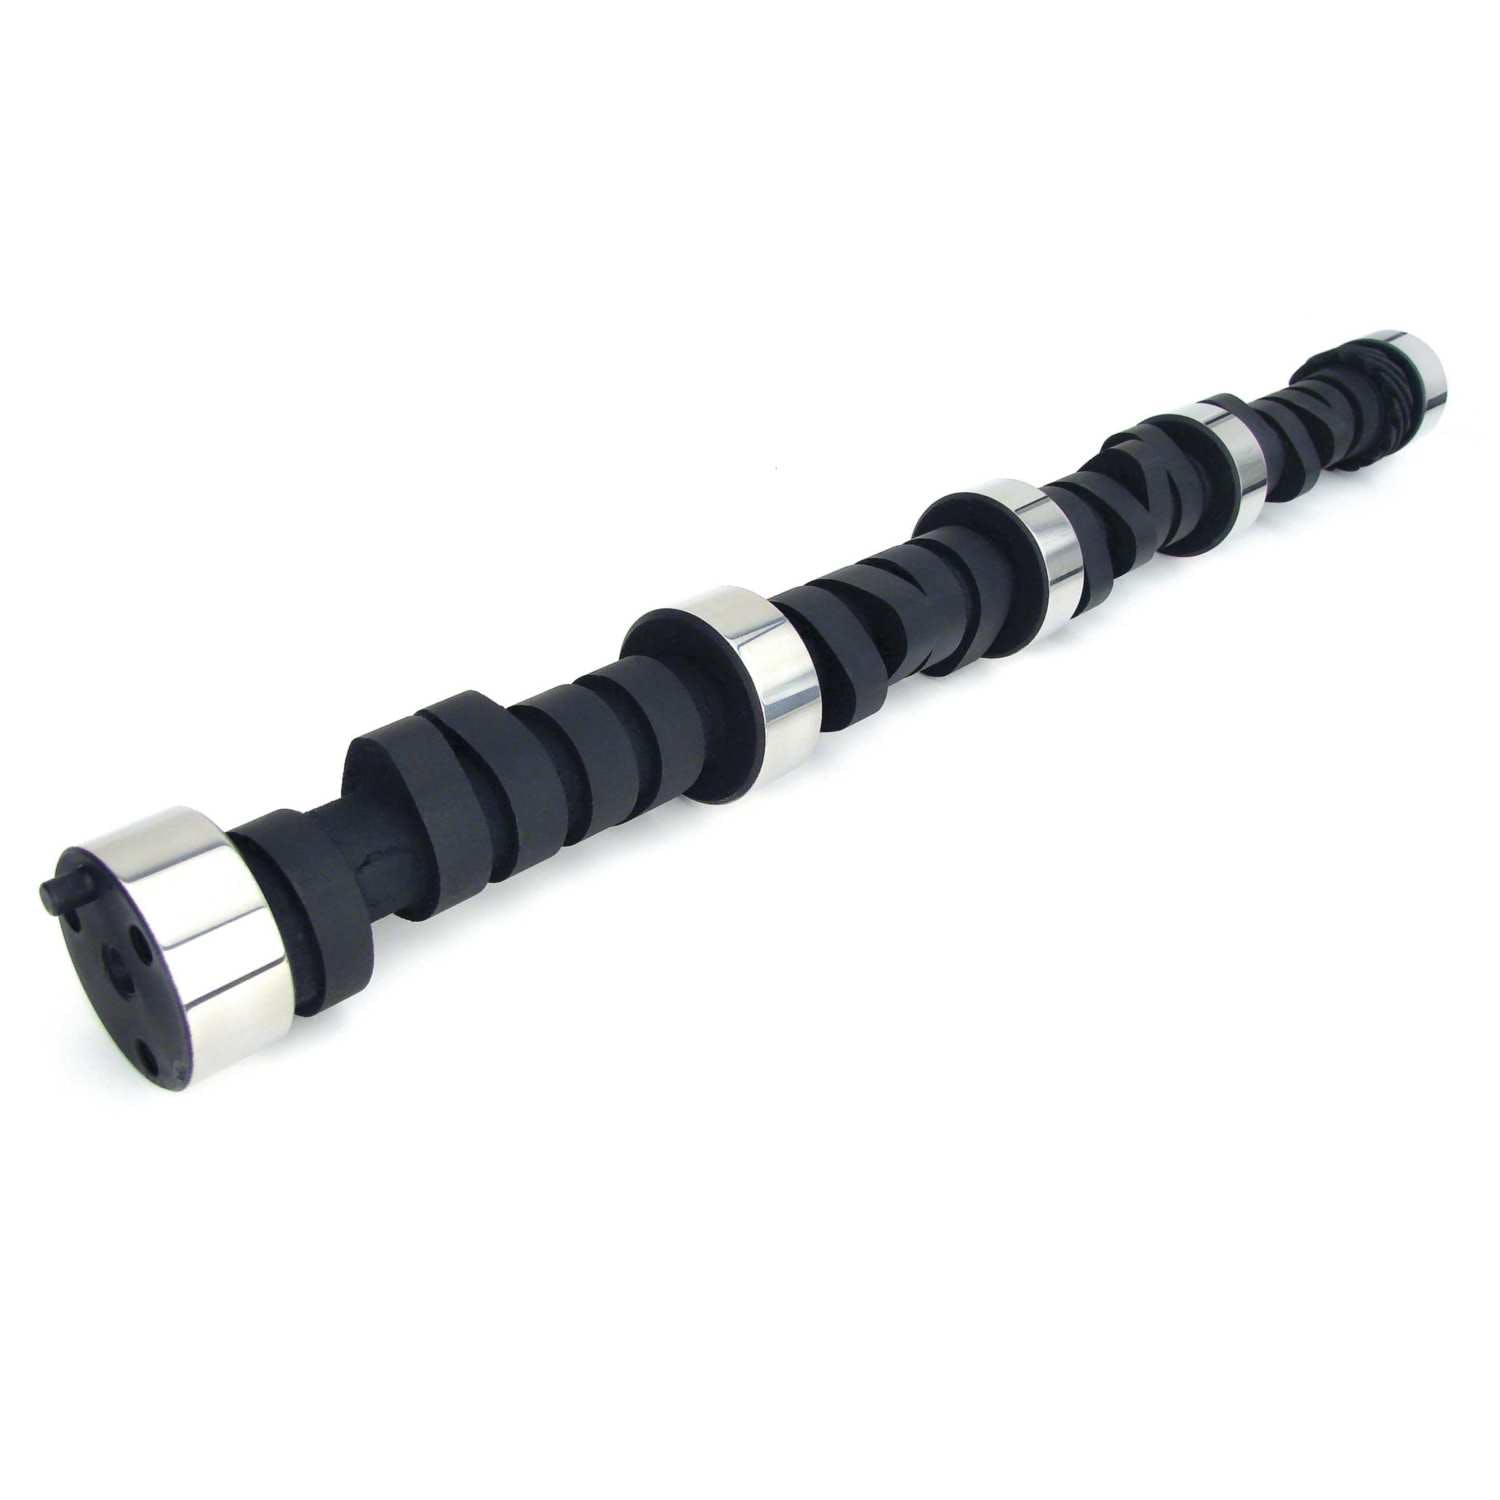 Competition Cams 11-610-5 Puller And Mud Race Camshaft